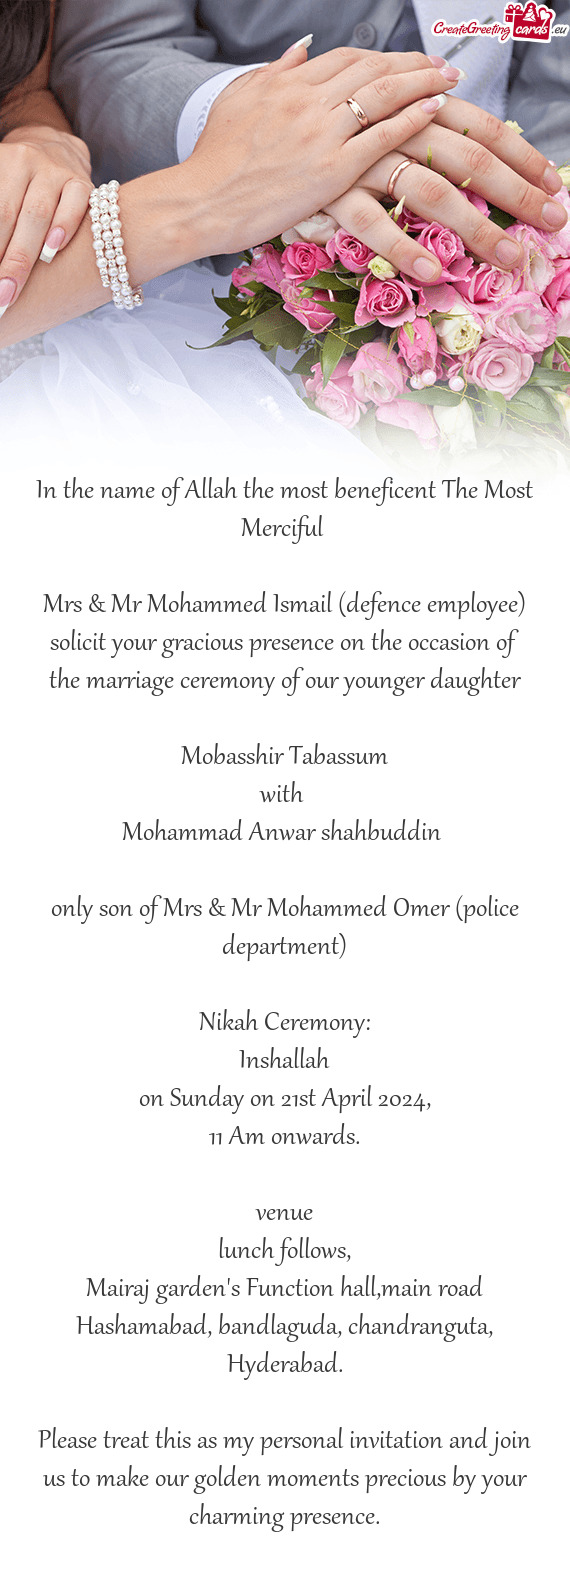 Mrs & Mr Mohammed Ismail (defence employee)